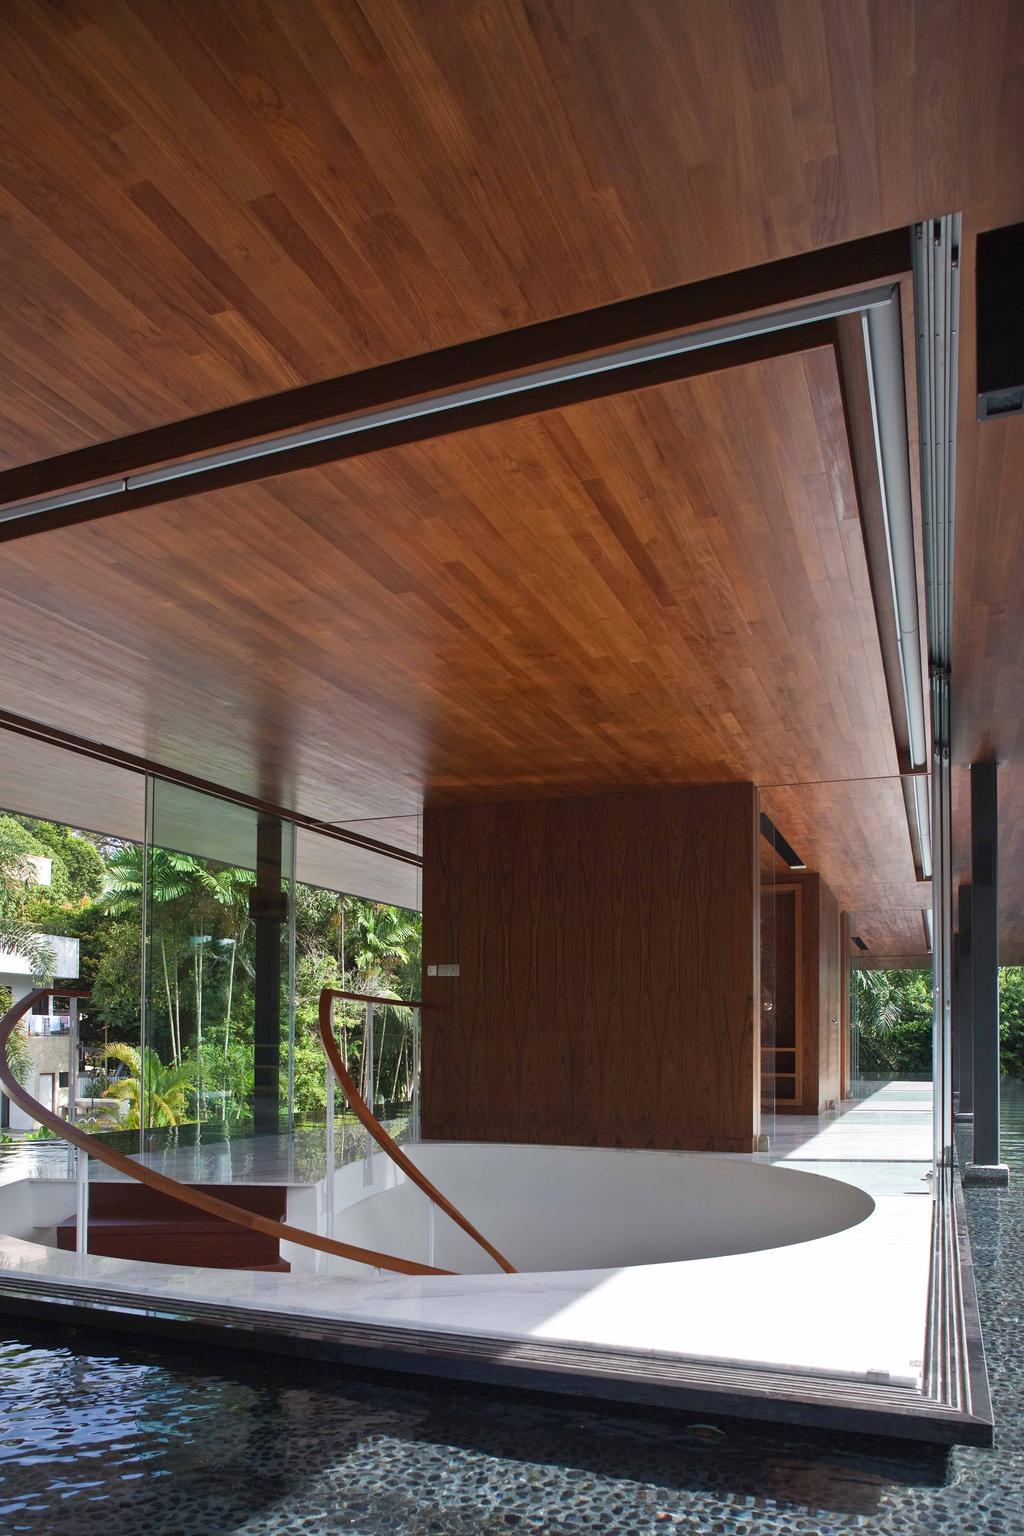 Contemporary, Landed, Bukit Timah (Water-Cooled House), Architect, Wallflower Architecture + Design, Wood Ceiling, Water Surrounded Platform, Floating Platform, Wooden Partitions, Stairway, Hardwood, Wood